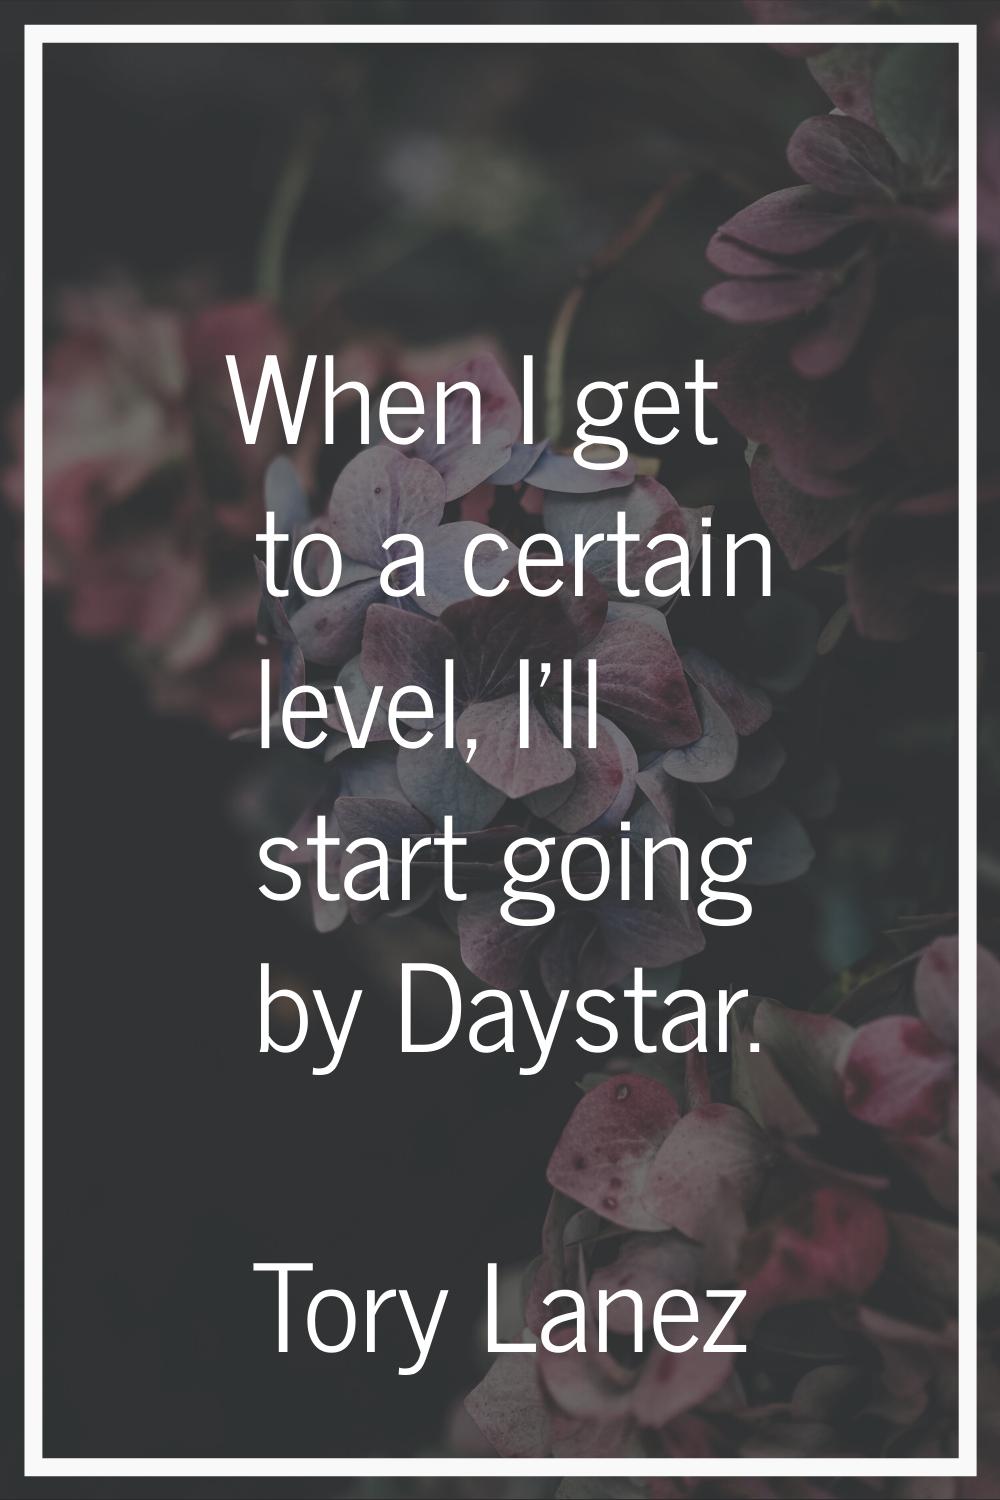 When I get to a certain level, I'll start going by Daystar.